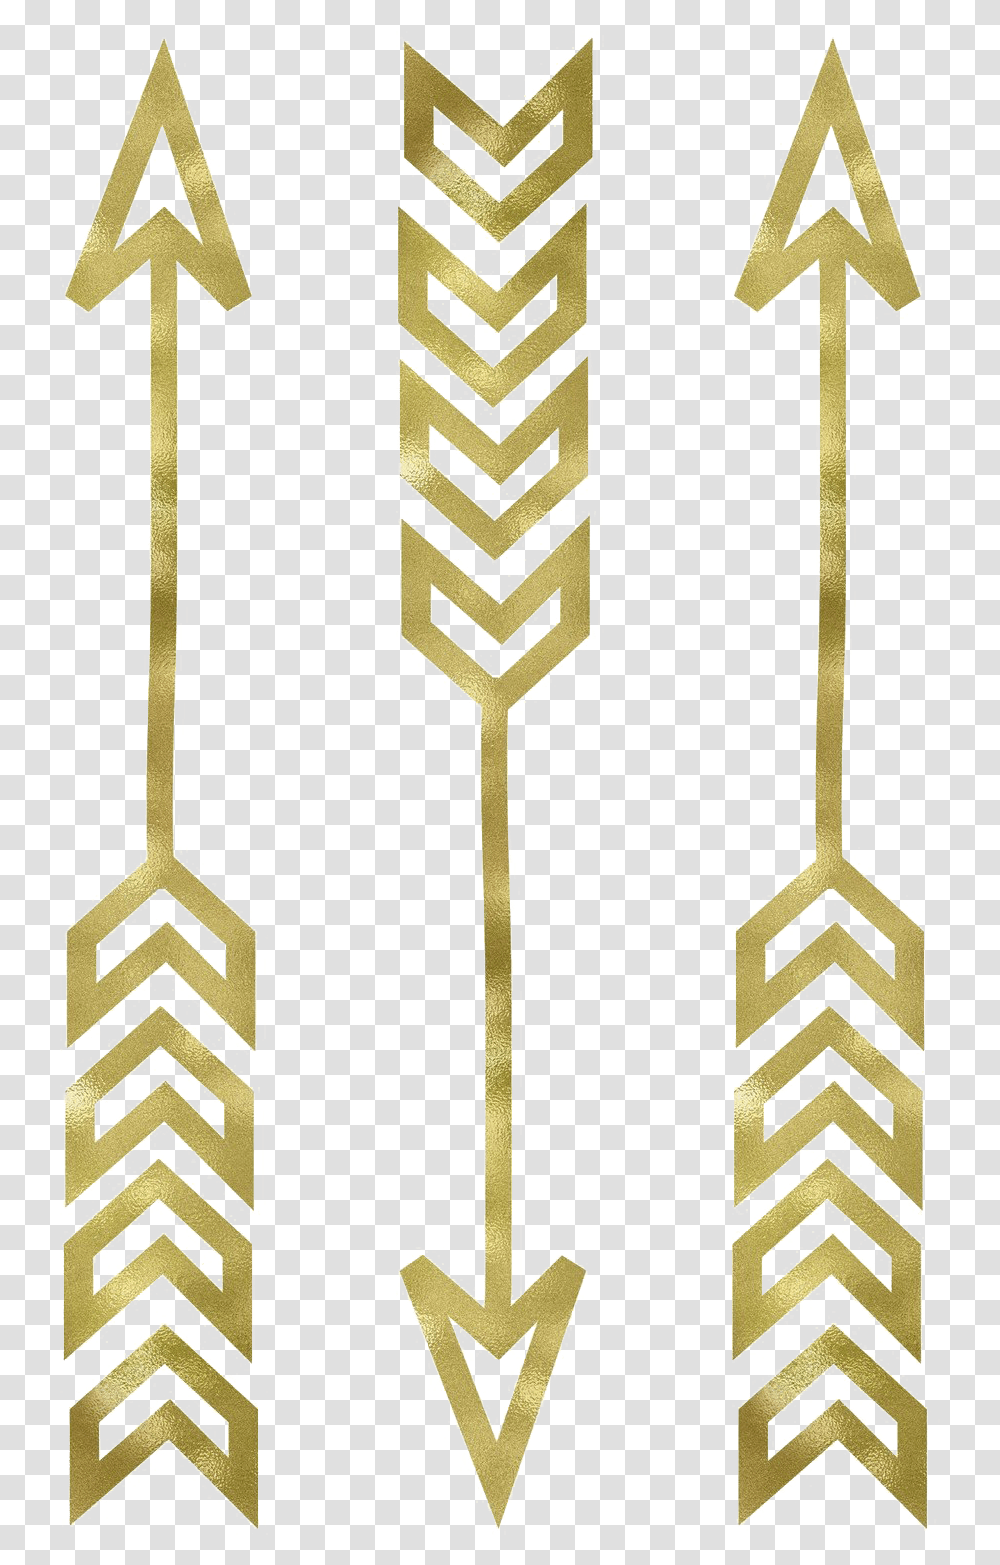 Tribal Arrow Image Printable Wall Art Gold, Oars, Cross, Paddle Transparent Png